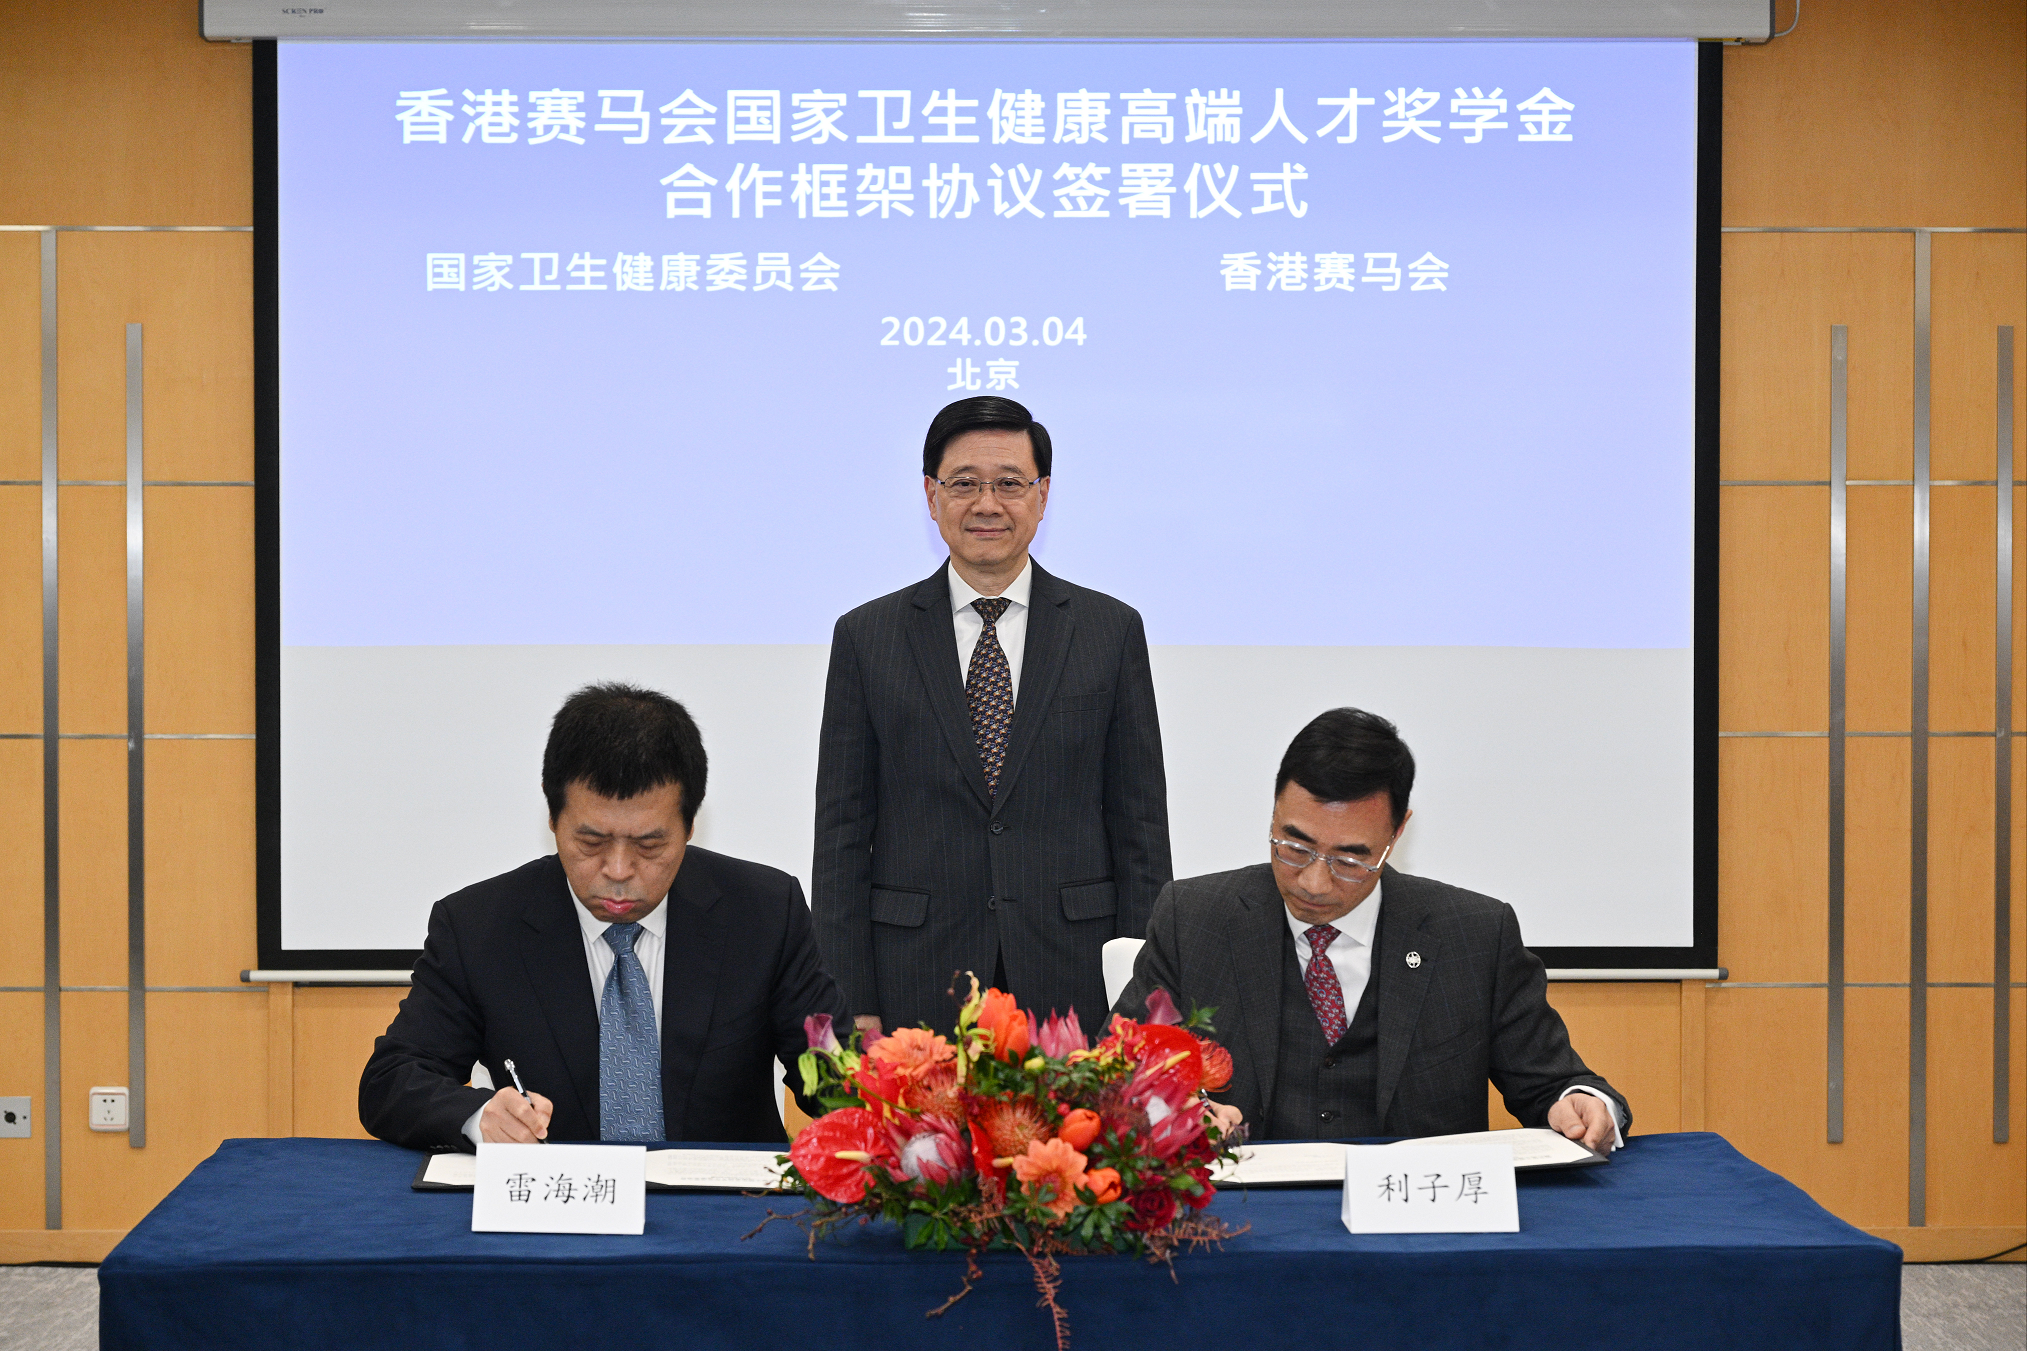 The Chief Executive, Mr John Lee, attended a signing ceremony of co-operation documents in Beijing today (March 4), witnessing the signing of co-operation documents between the Hong Kong Jockey Club and the National Health Commission (NHC) and the Health Bureau respectively on strengthening the training of healthcare talent and commencing projects on prevention and response against local communicable diseases. Photo shows Mr Lee (centre) witnessing the signing of the Collaboration Agreement Between the National Health Commission and The Hong Kong Jockey Club on a Scholarship-cum-fellowship for Top Talent in the Mainland by the Chairman of the Hong Kong Jockey Club, Mr Michael Lee (right), and Vice-minister of the NHC Mr Lei Haichao (left).
